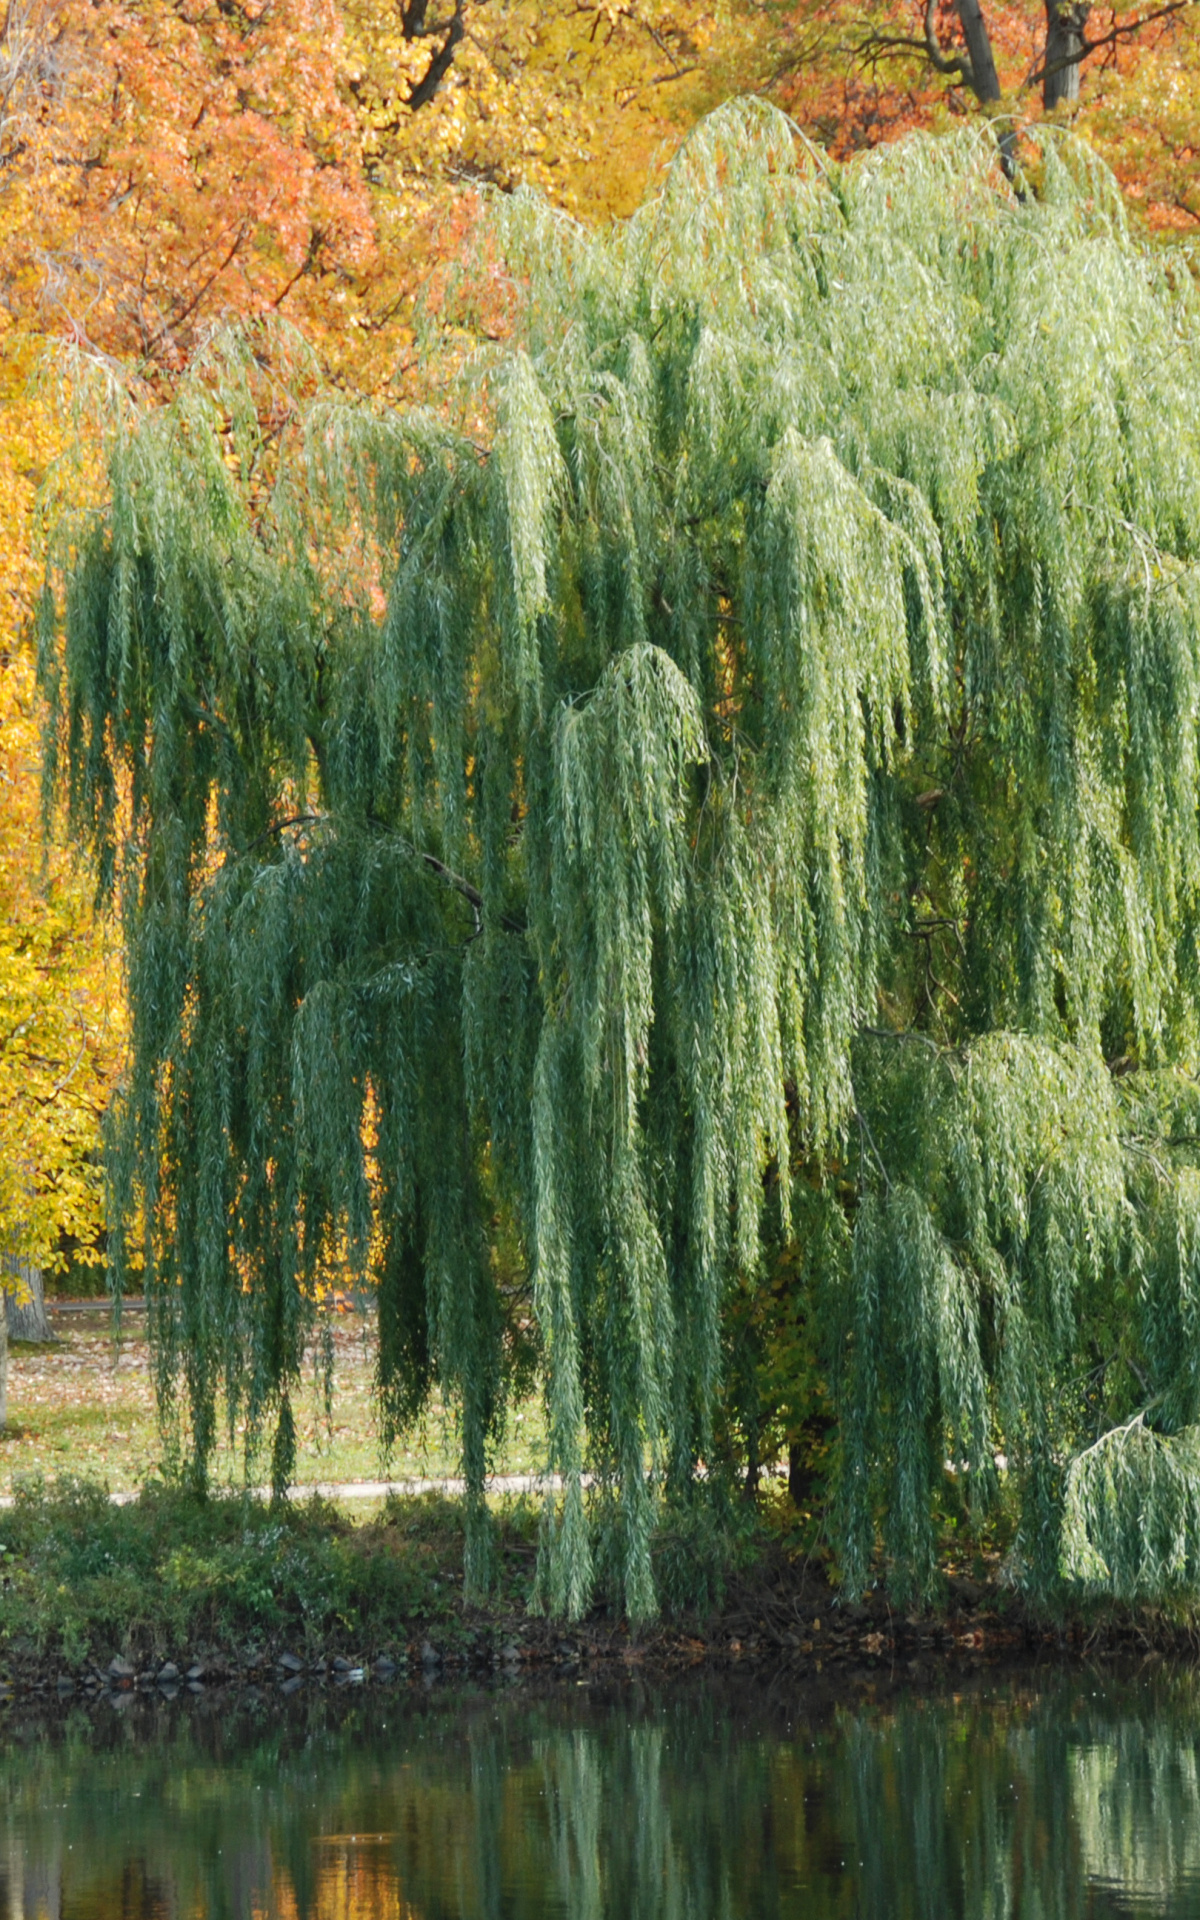 Weeping willow tree drawings, Nature's inspiration, Delicate branches, Serene beauty, 1200x1920 HD Handy